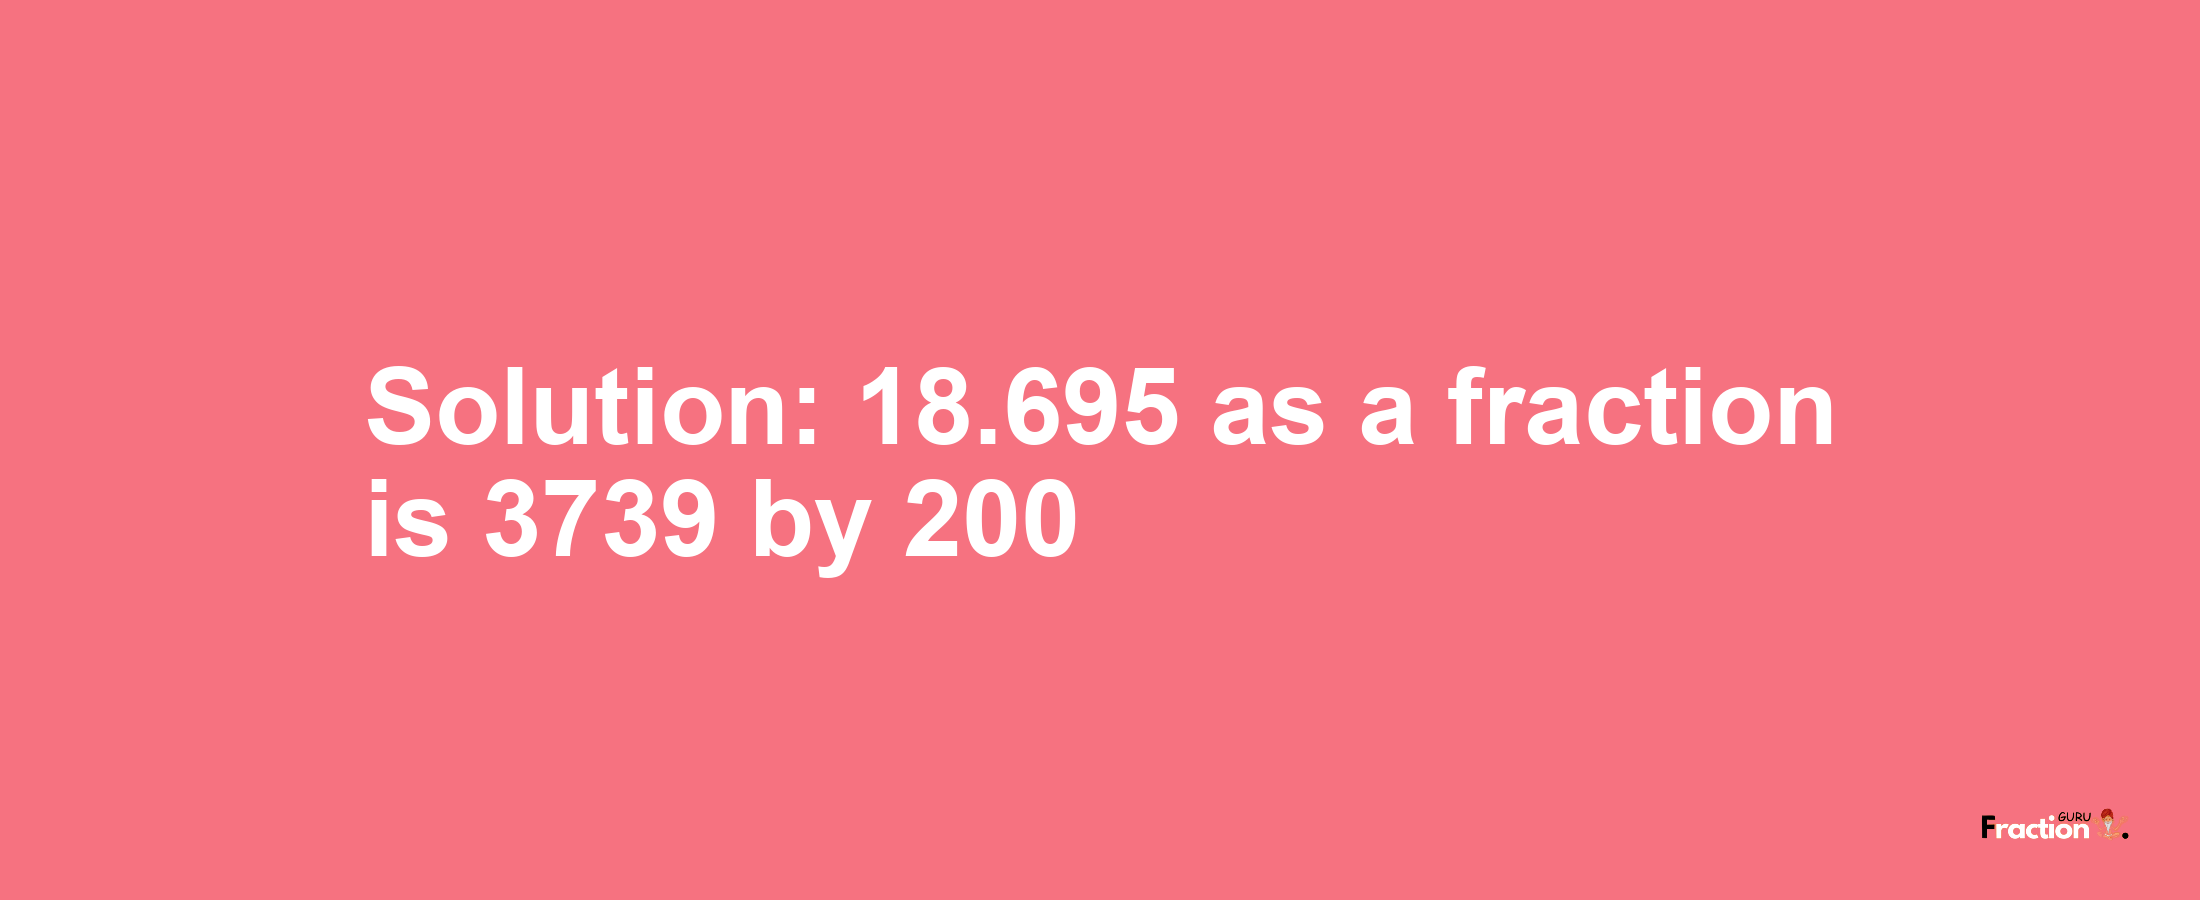 Solution:18.695 as a fraction is 3739/200